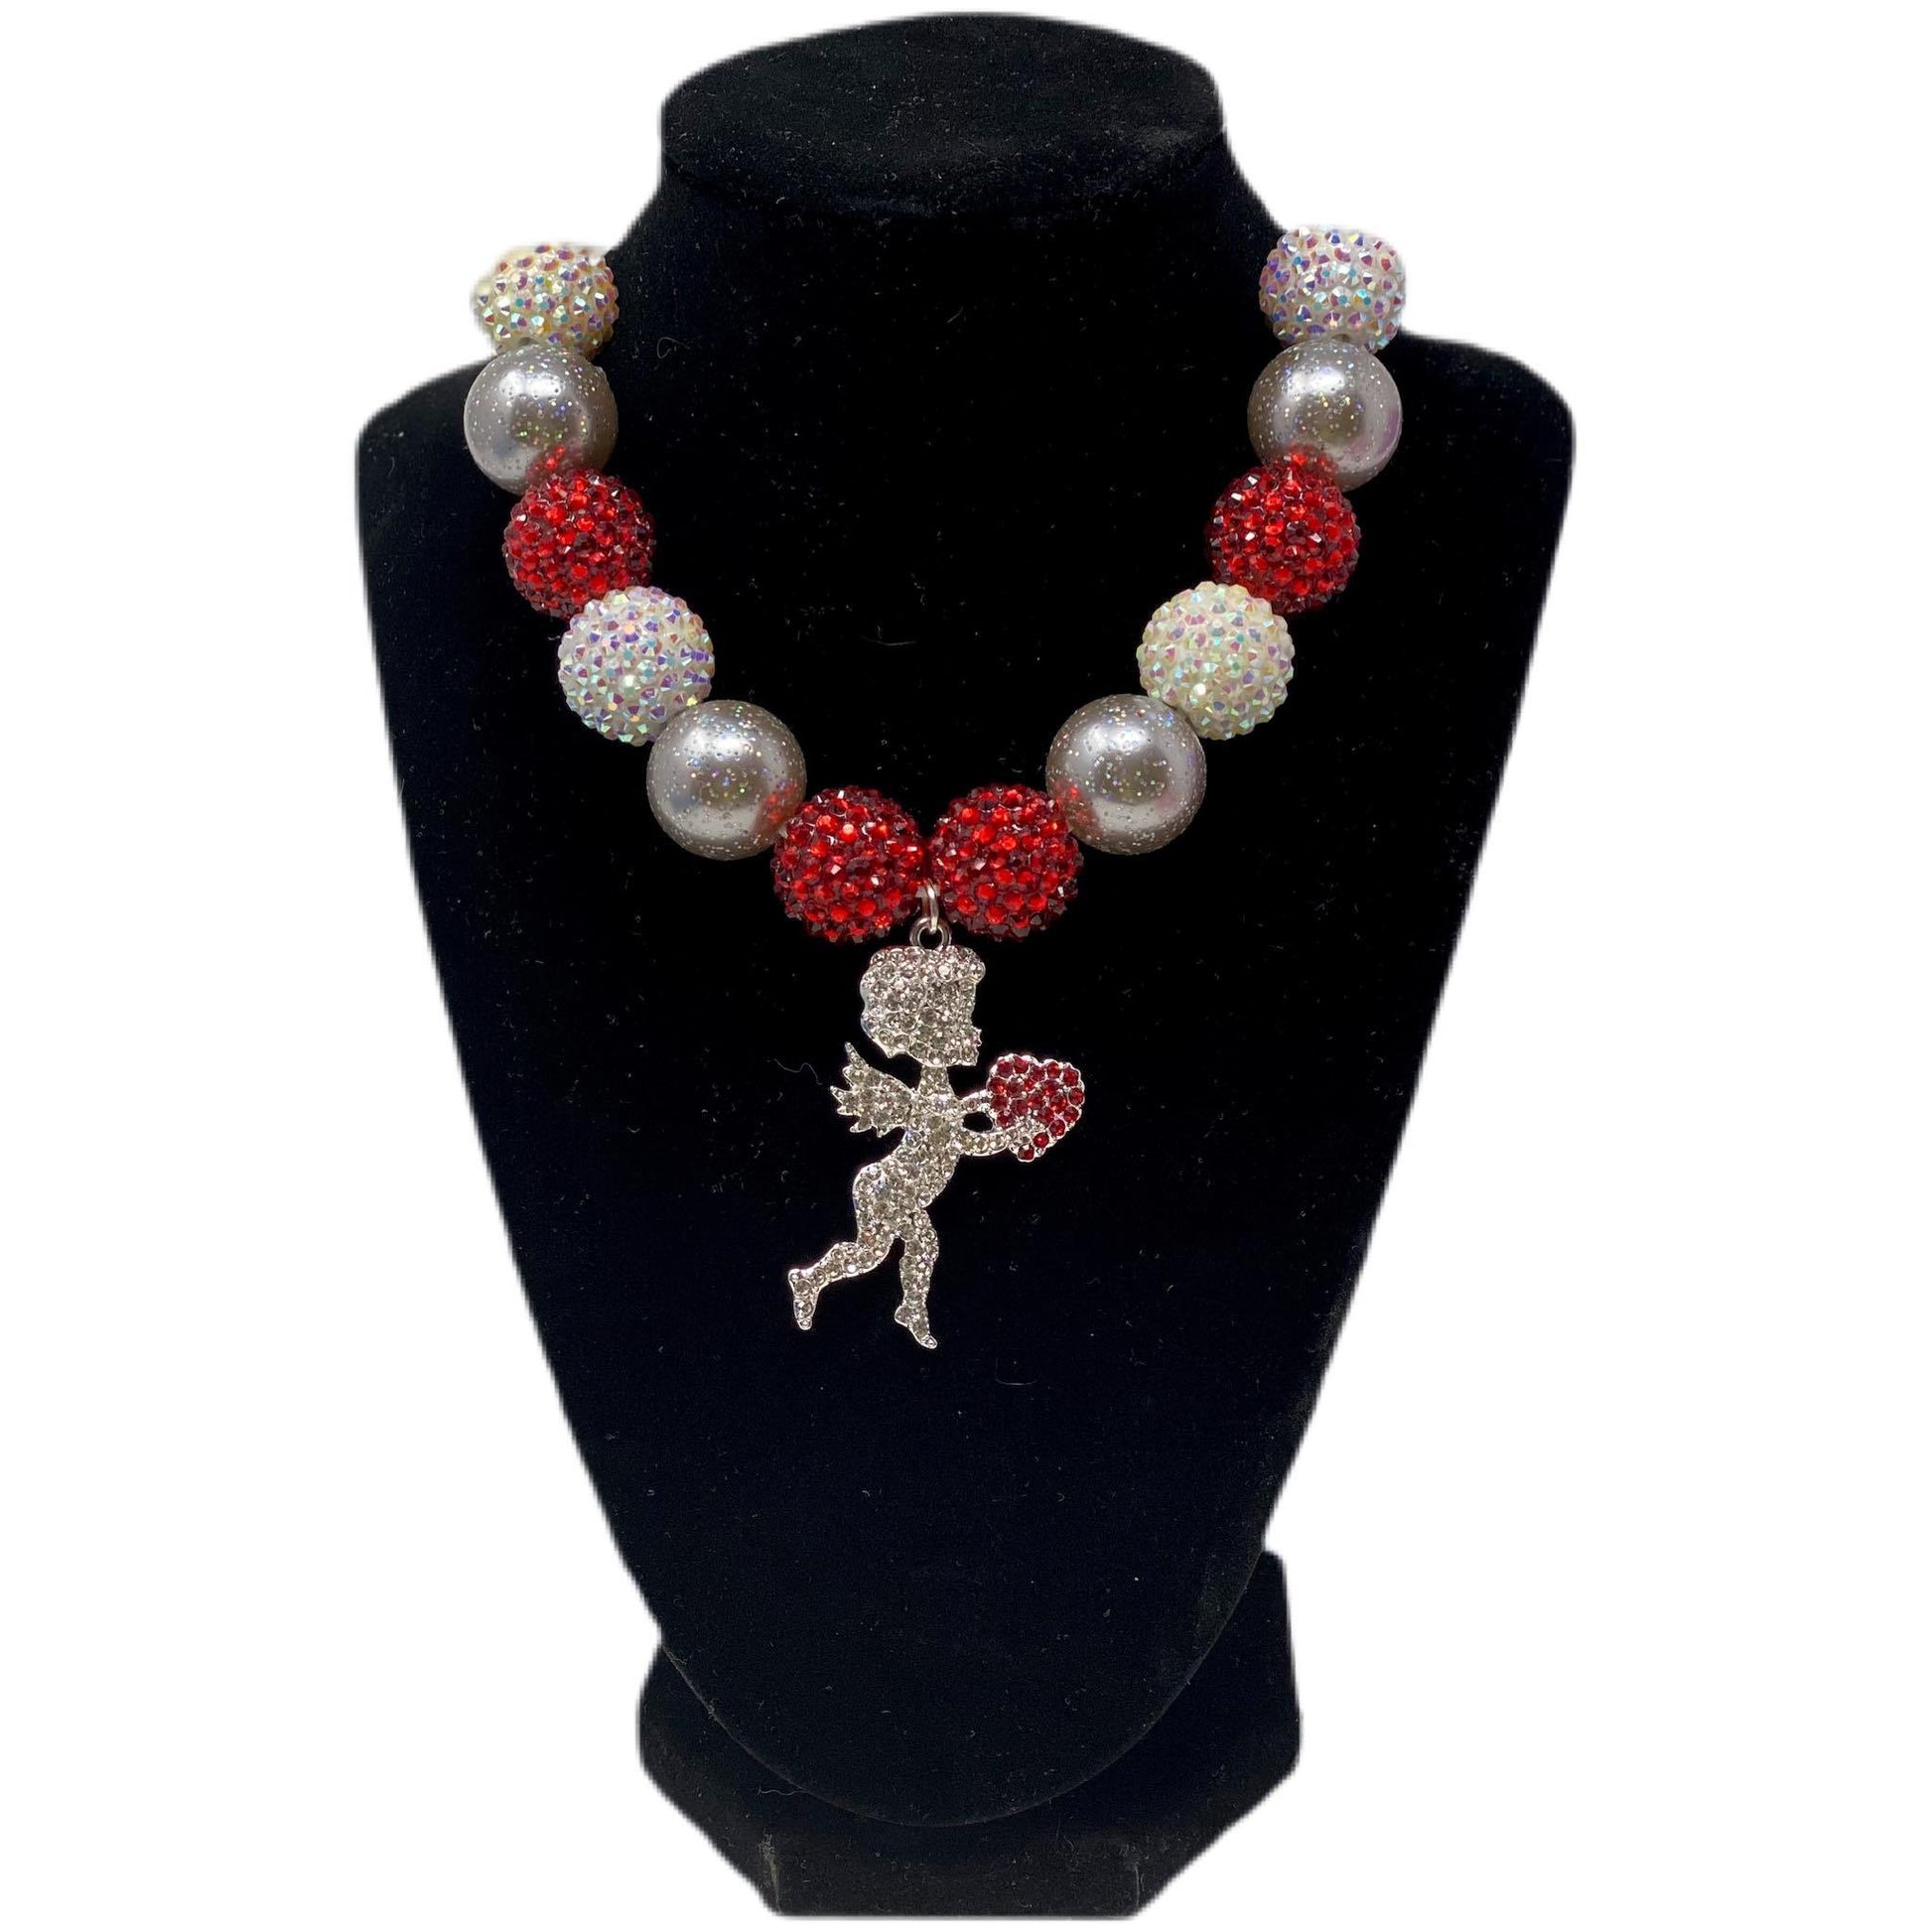 V-Day Bubblegum Necklace with Silver Cupid & Red Heart Pendant